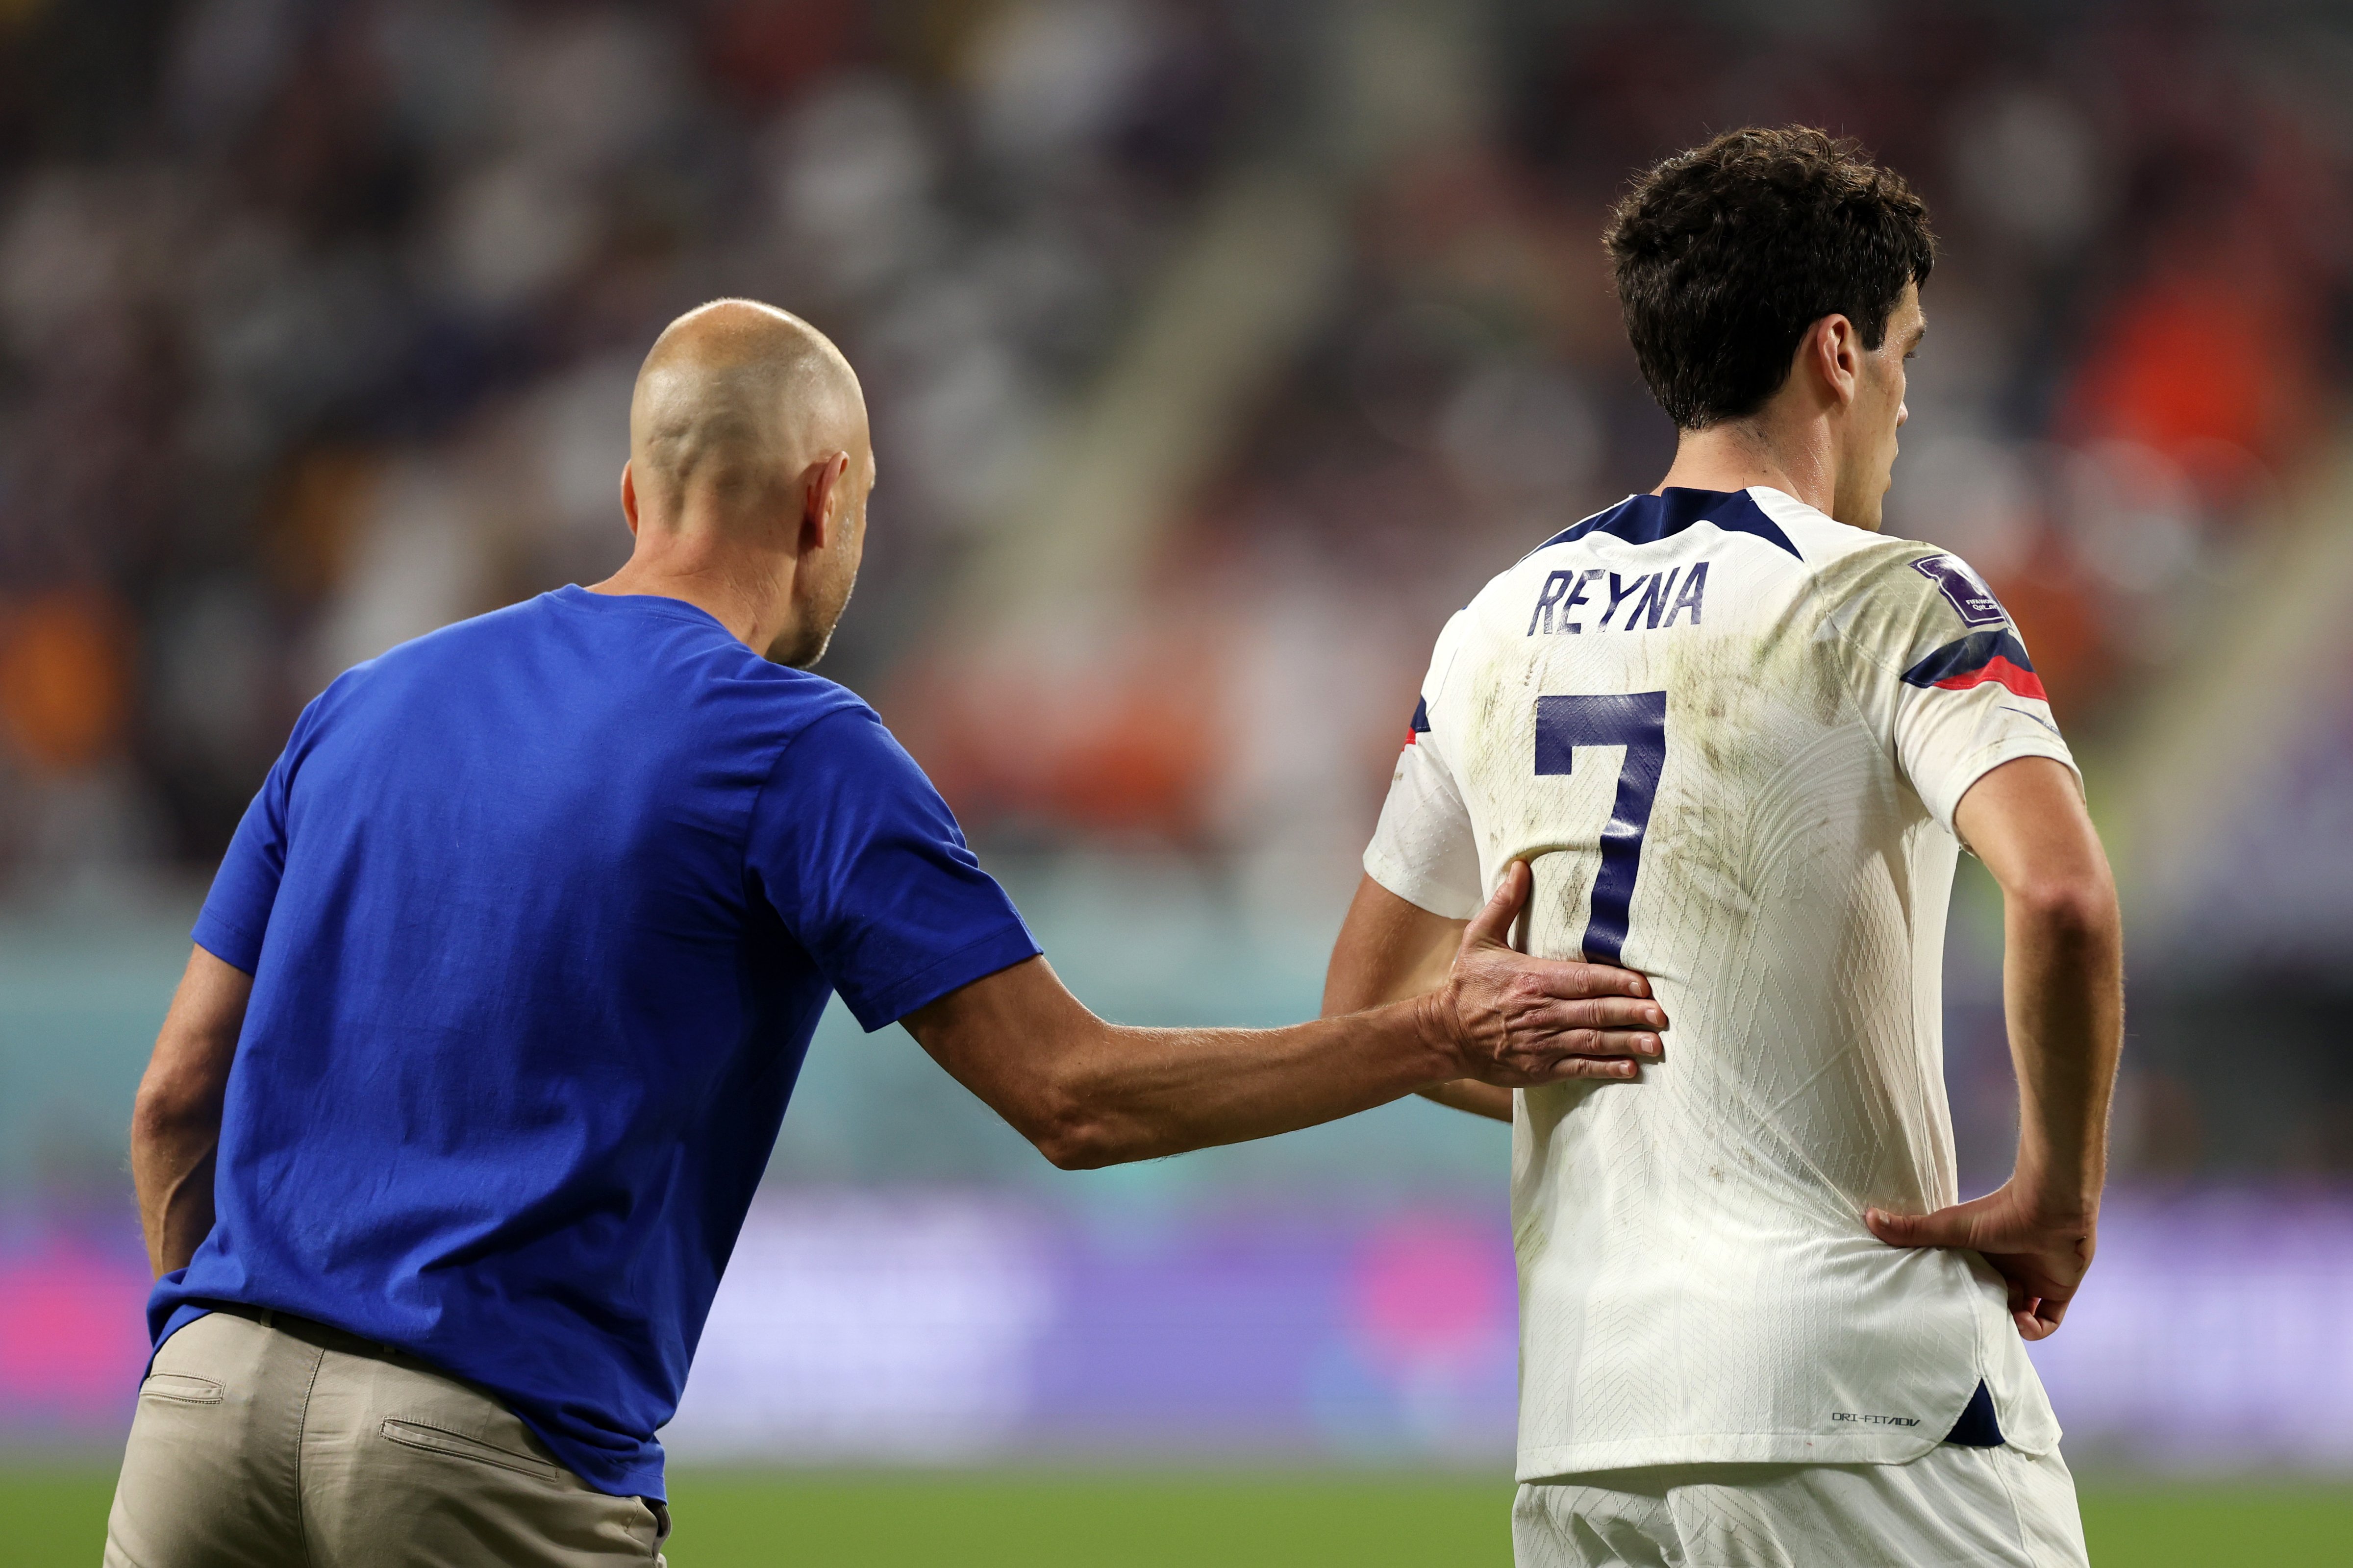 U.S. head coach Gregg Berhalter pats Giovanni Reyna on the back during a match against the Netherlands during the FIFA World Cup in Qatar on Dec. 03, 2022. (Patrick Smith—FIFA/Getty Images)